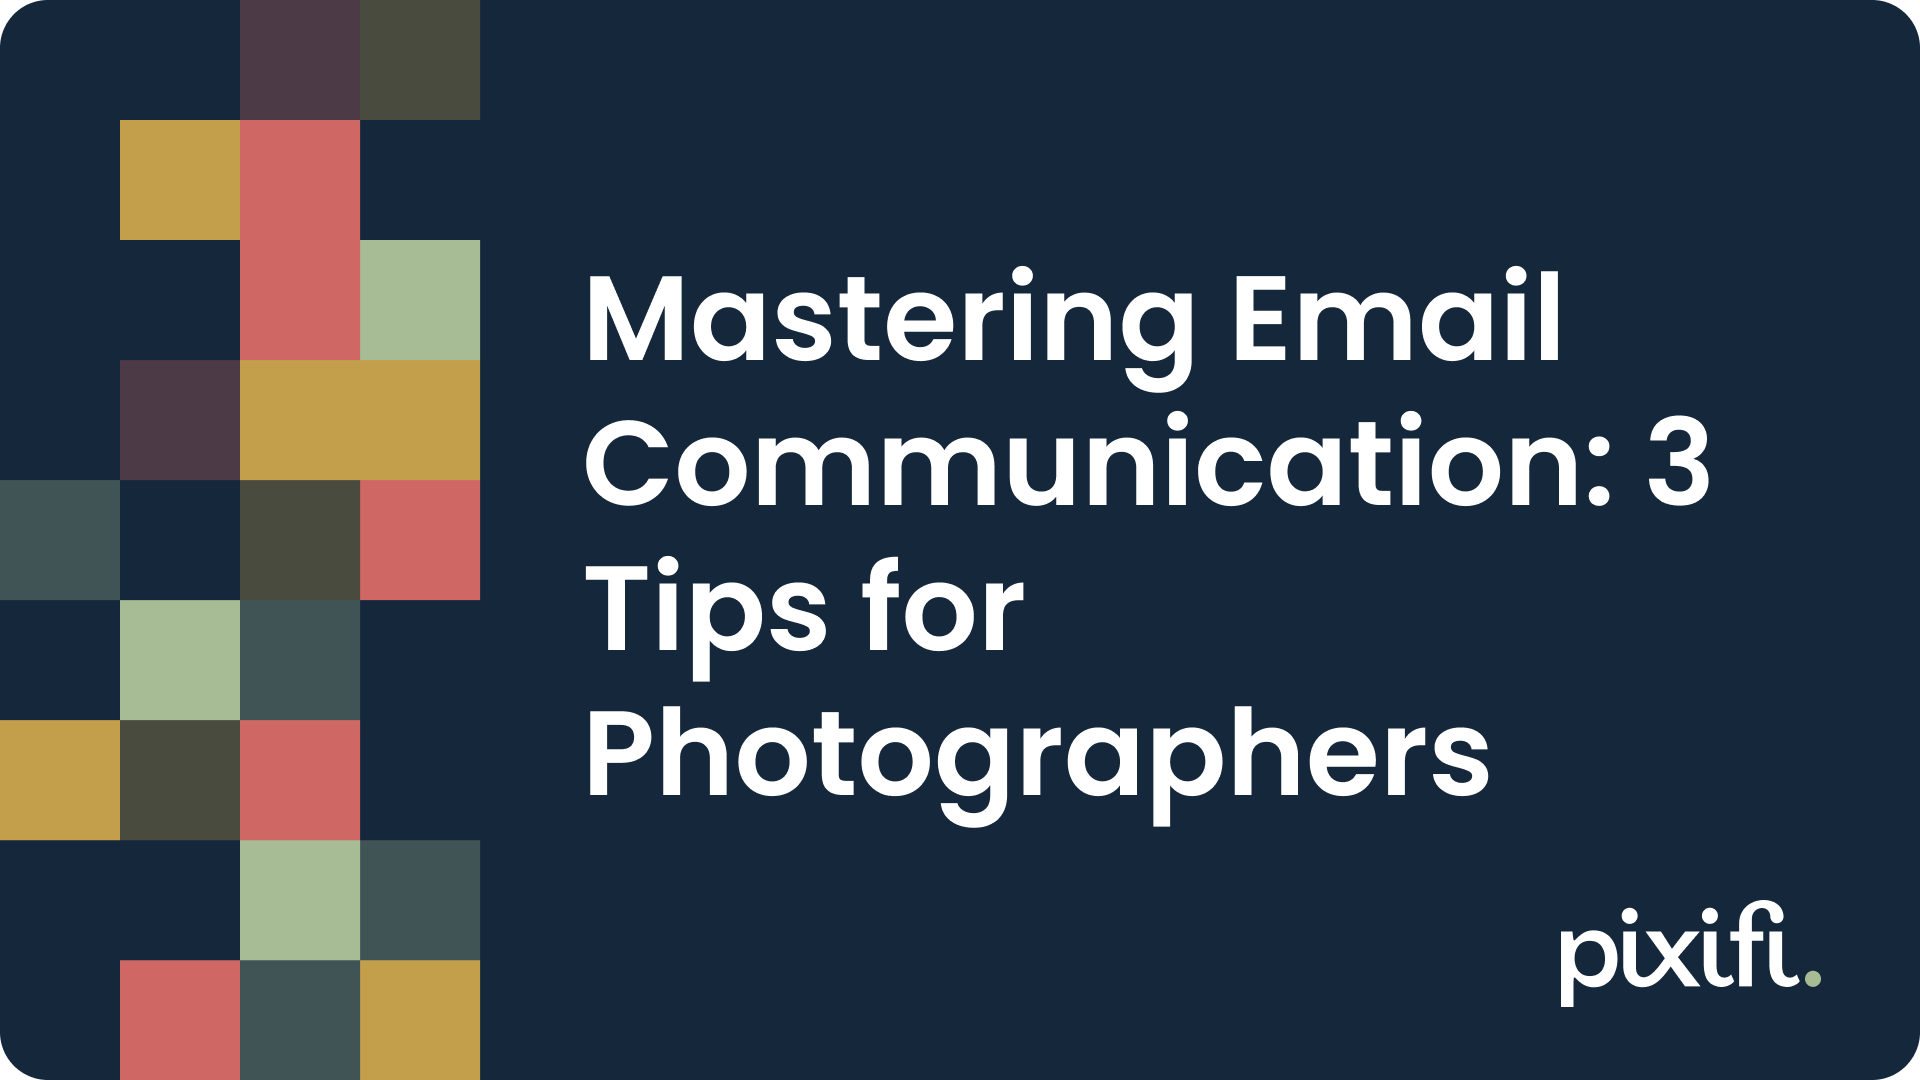 Mastering Email Communication: 3 Tips for Photographers